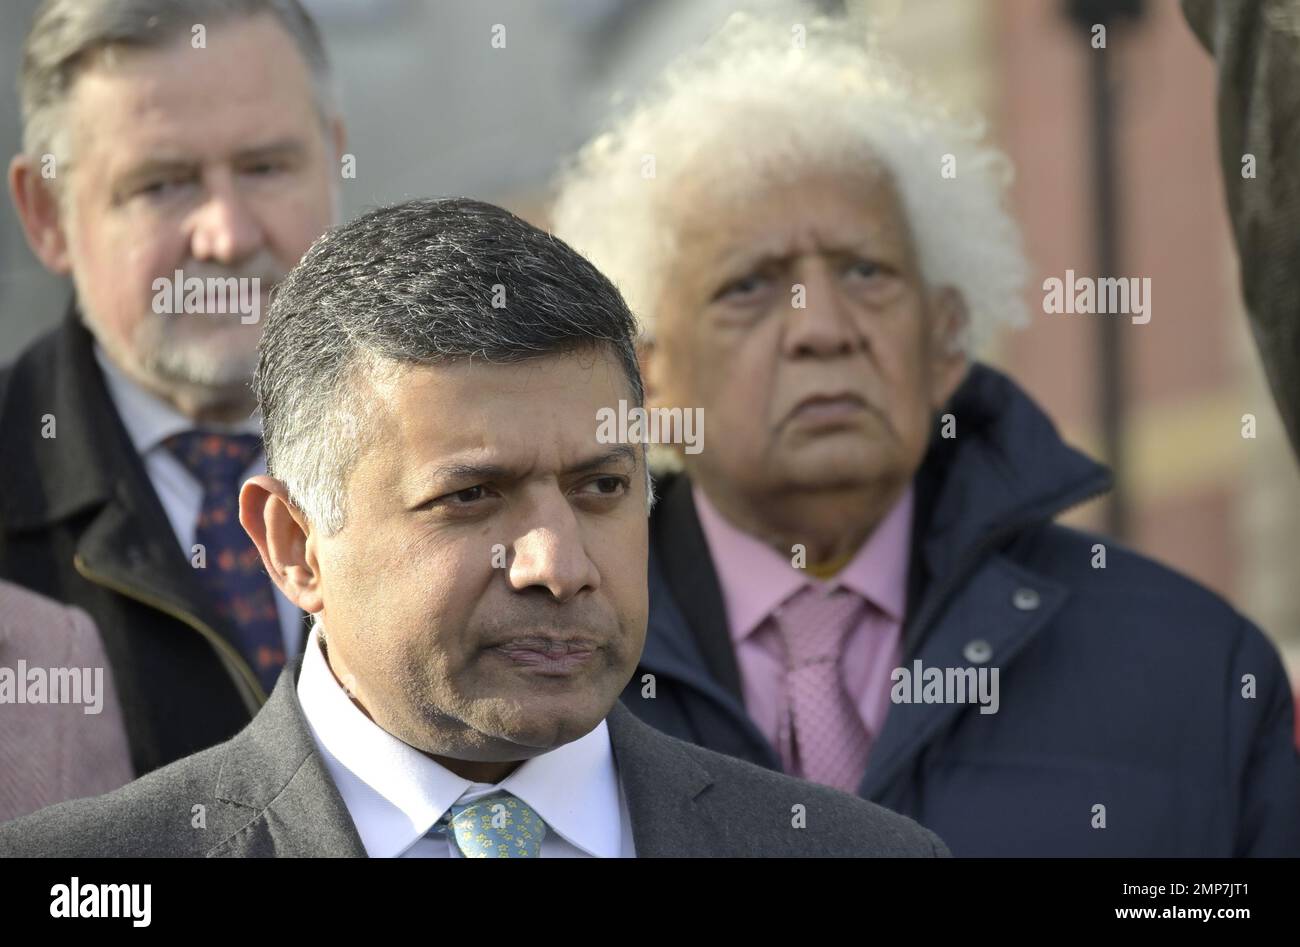 Vikram Kumar Doraiswami - High Commissioner of India to the  UK - at an event by the statue of Mahatma Gandhi in Parliament Square to commemorate Mart Stock Photo